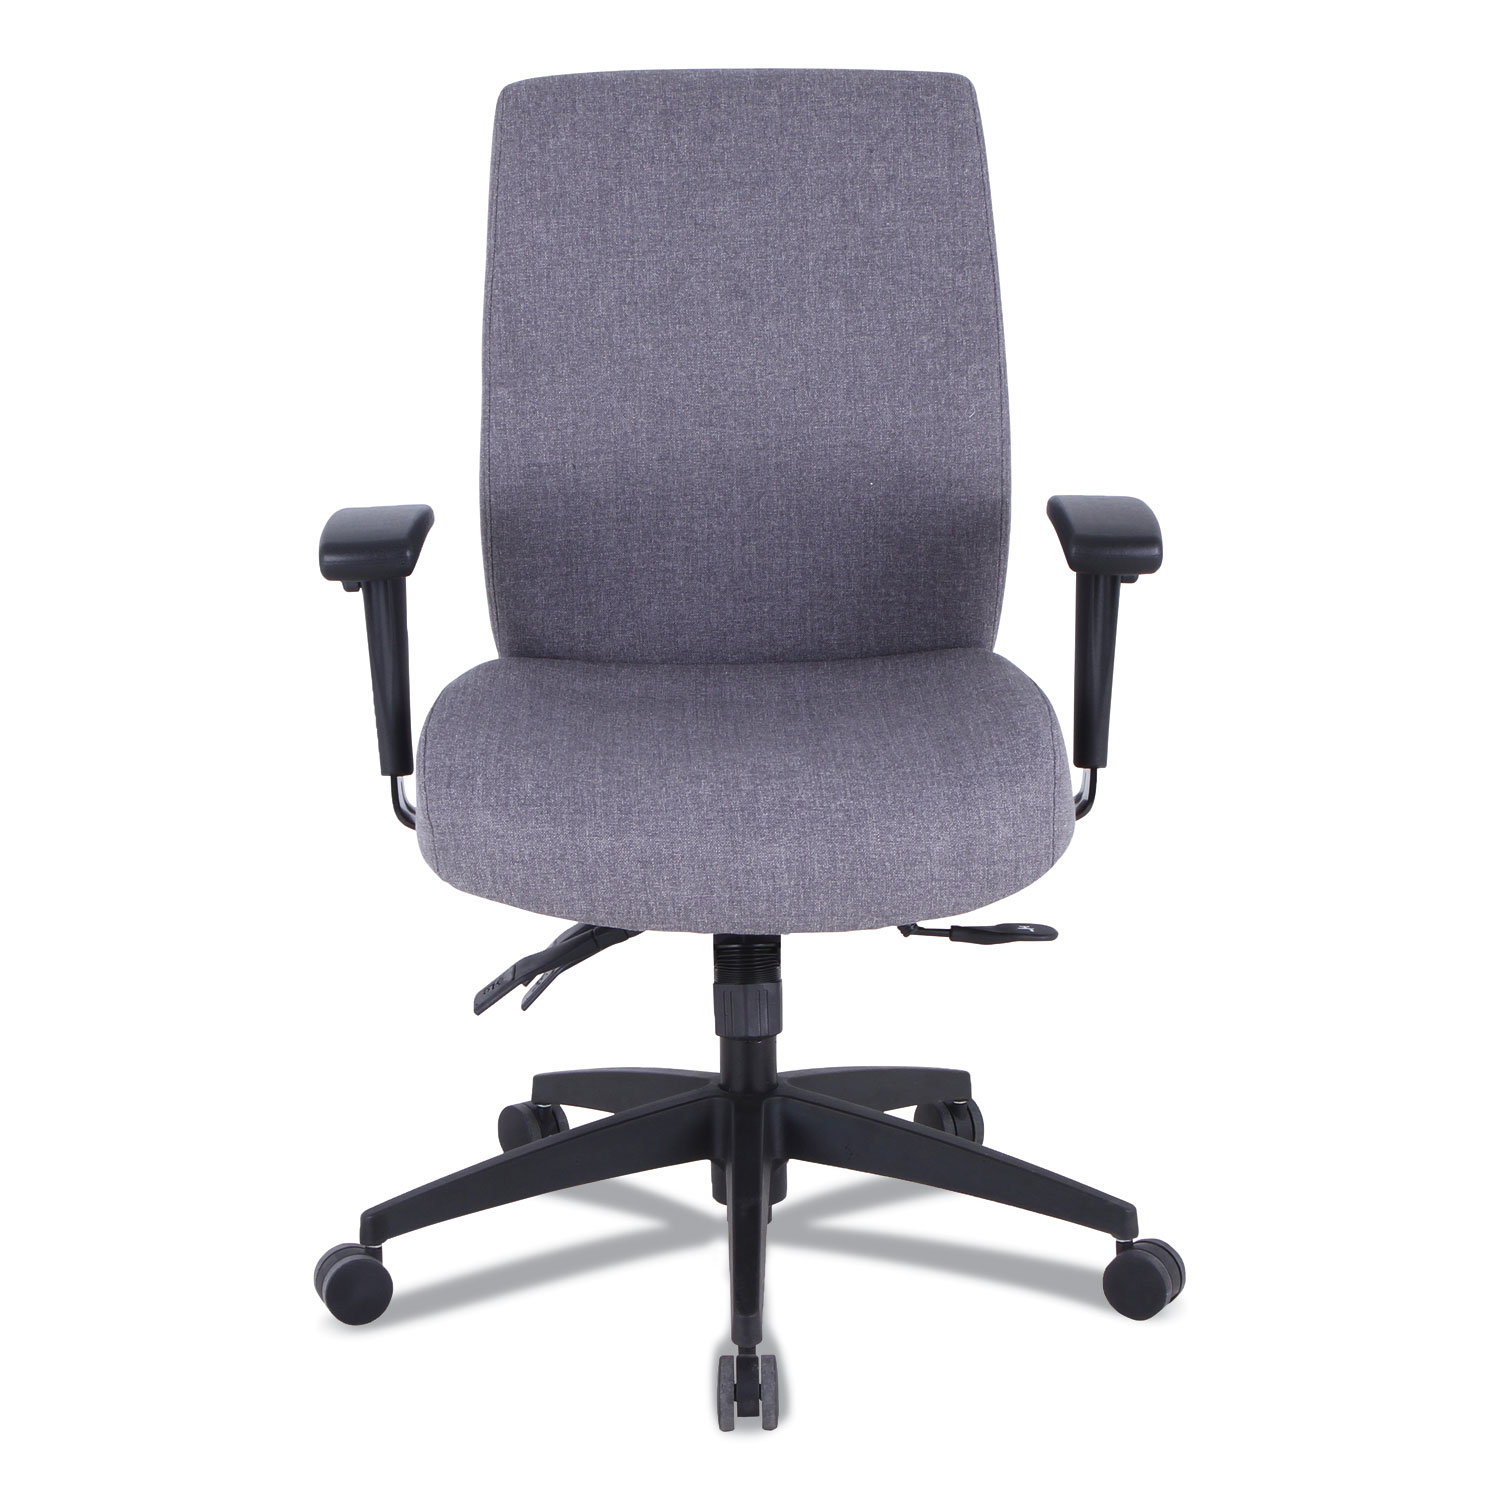 Alera Wrigley Series 24/7 High Performance Mid-Back Multifunction Task Chair, Up to 275 lbs., Gray Seat/Back, Black Base